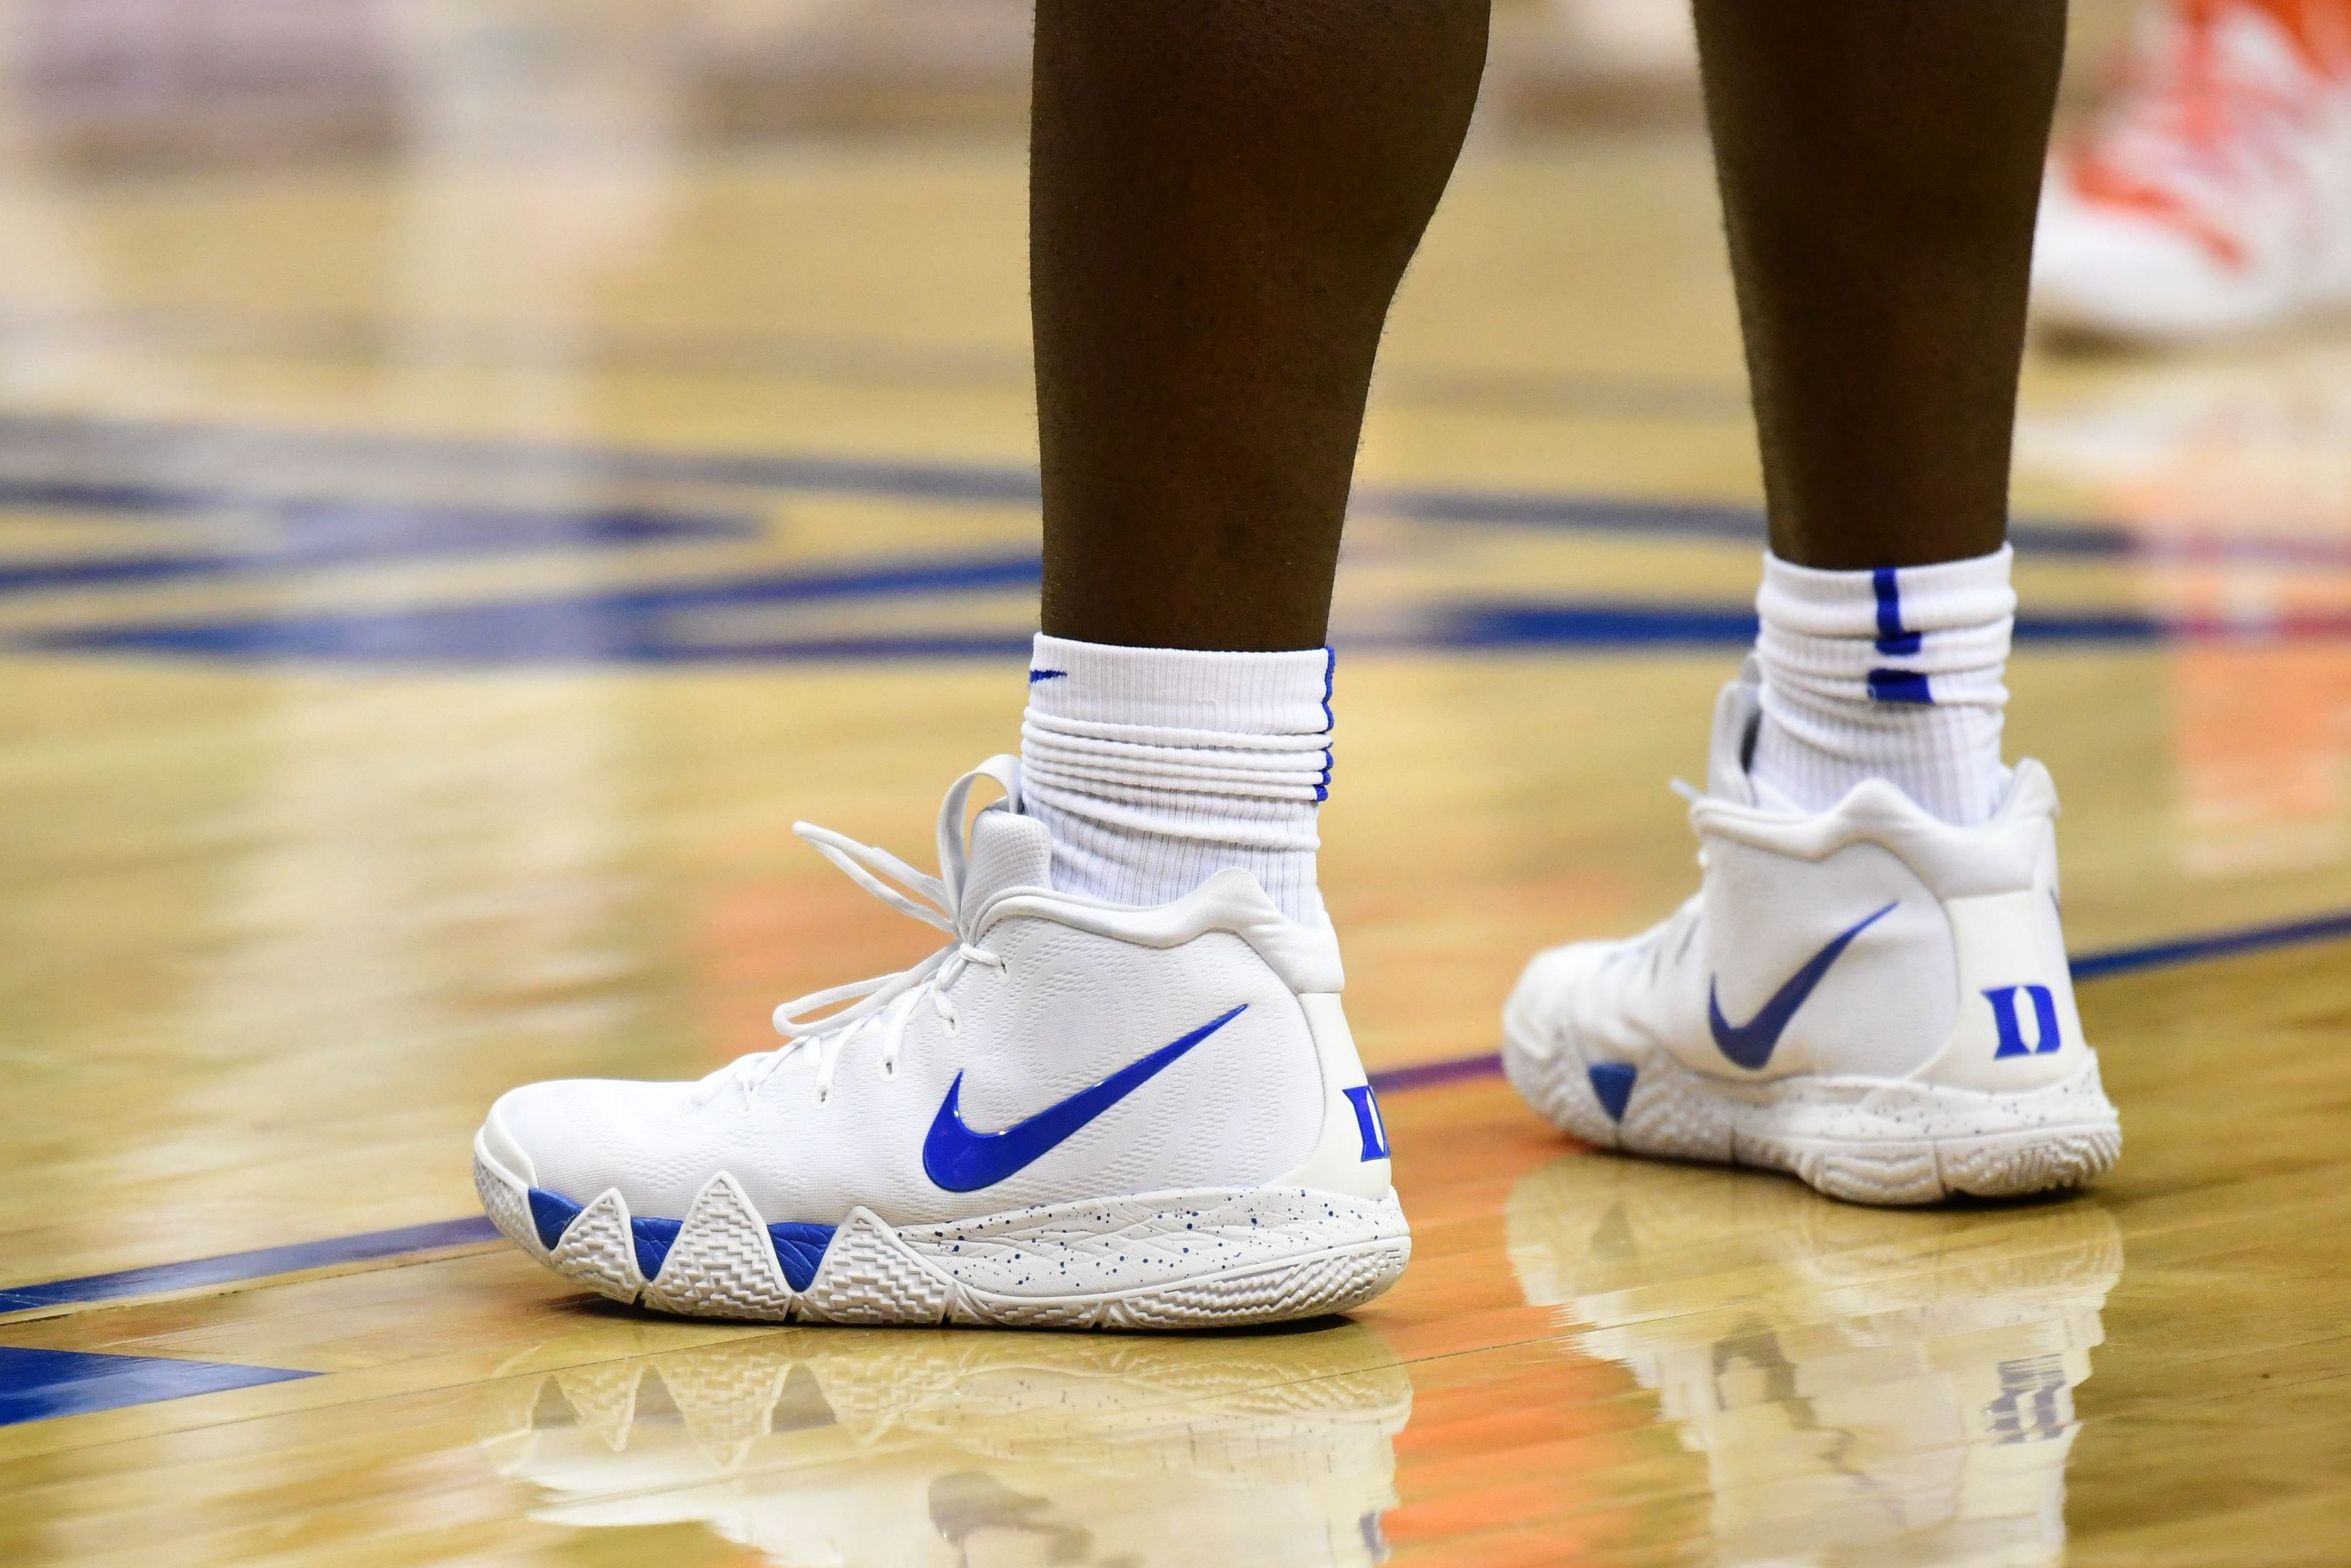 Policía guapo Disfraces Zion Williamson Wore Nike Kryrie 4 Sneakers for His ACC Comeback